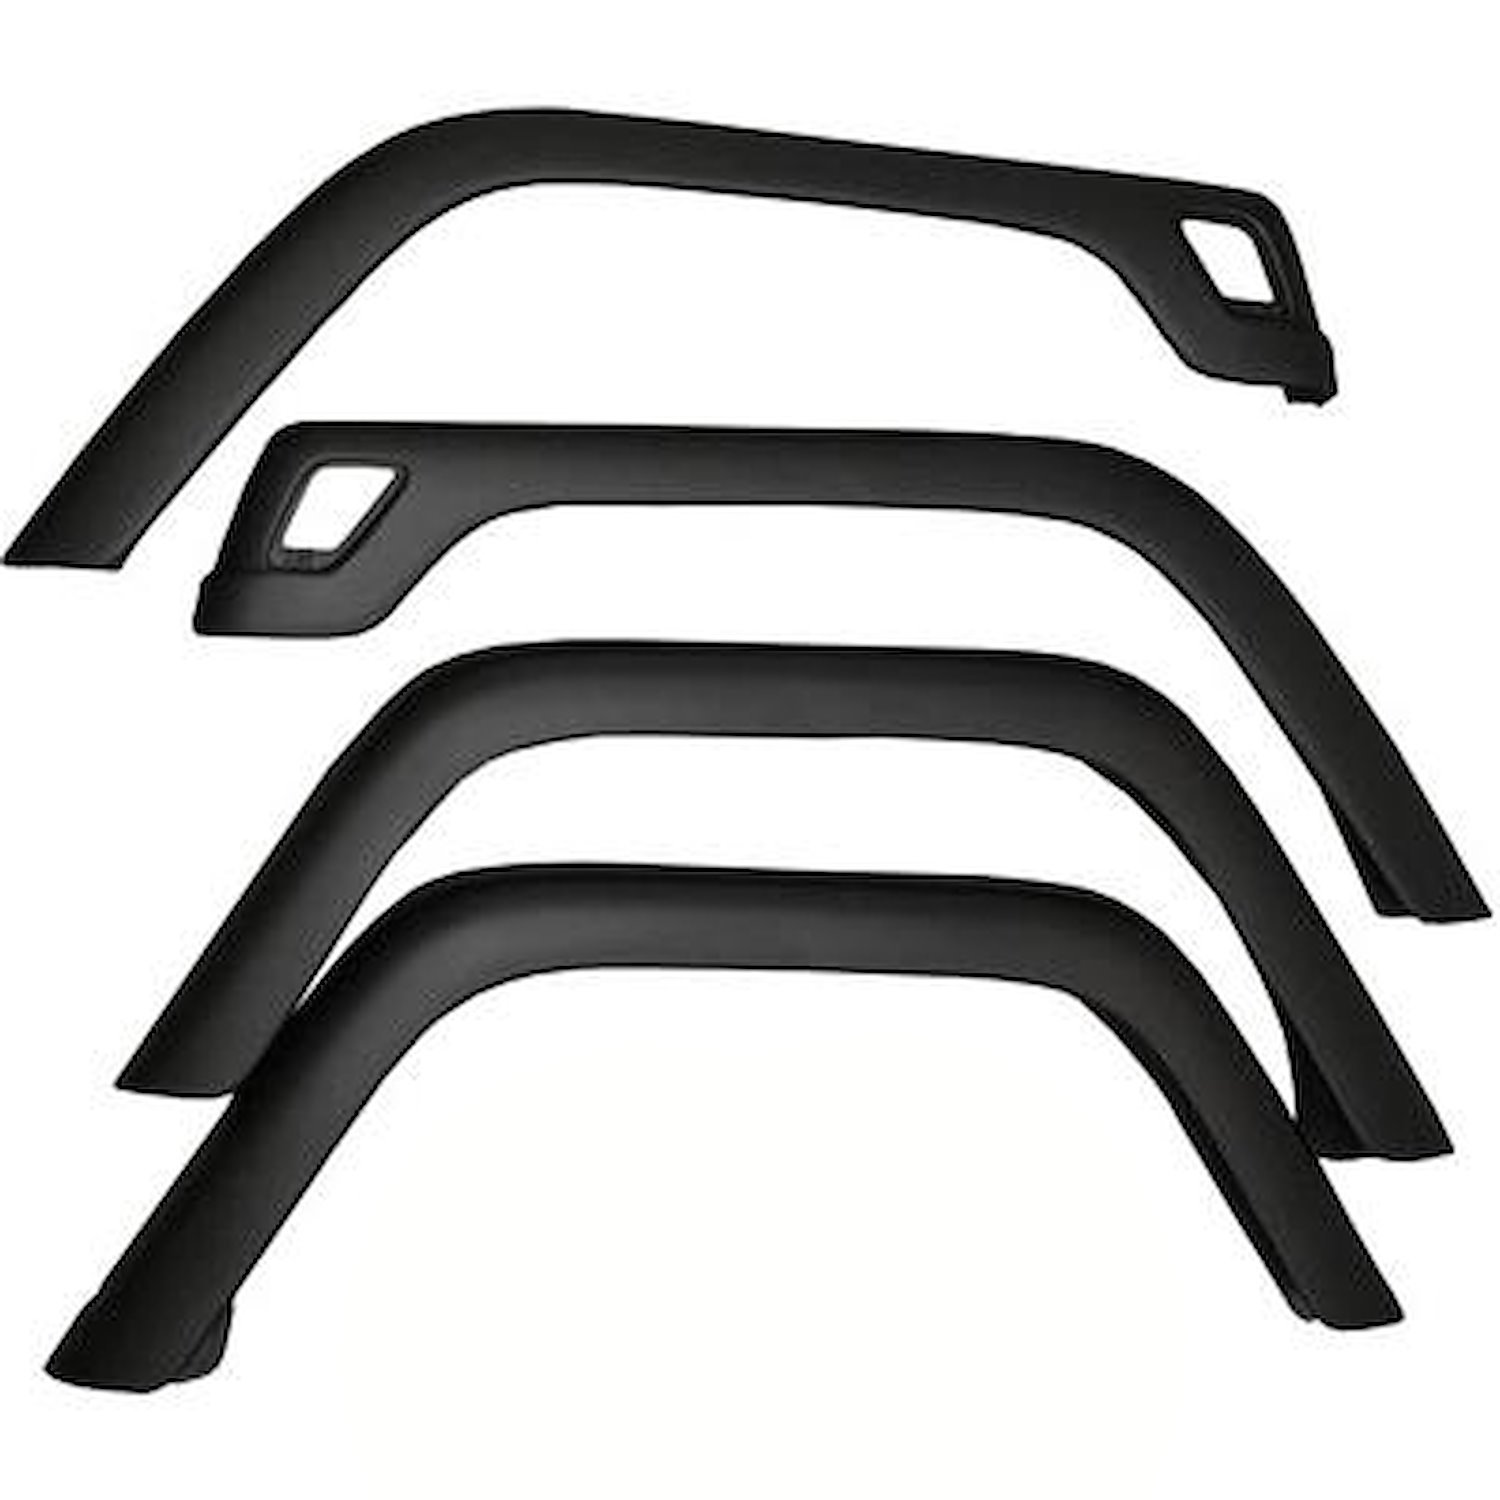 OE Style Fender Flare Kit for 1997-2006 Jeep TJ Wrangler and 2004-2006 Jeep LJ Wrangler Unlimited [4-Piece]